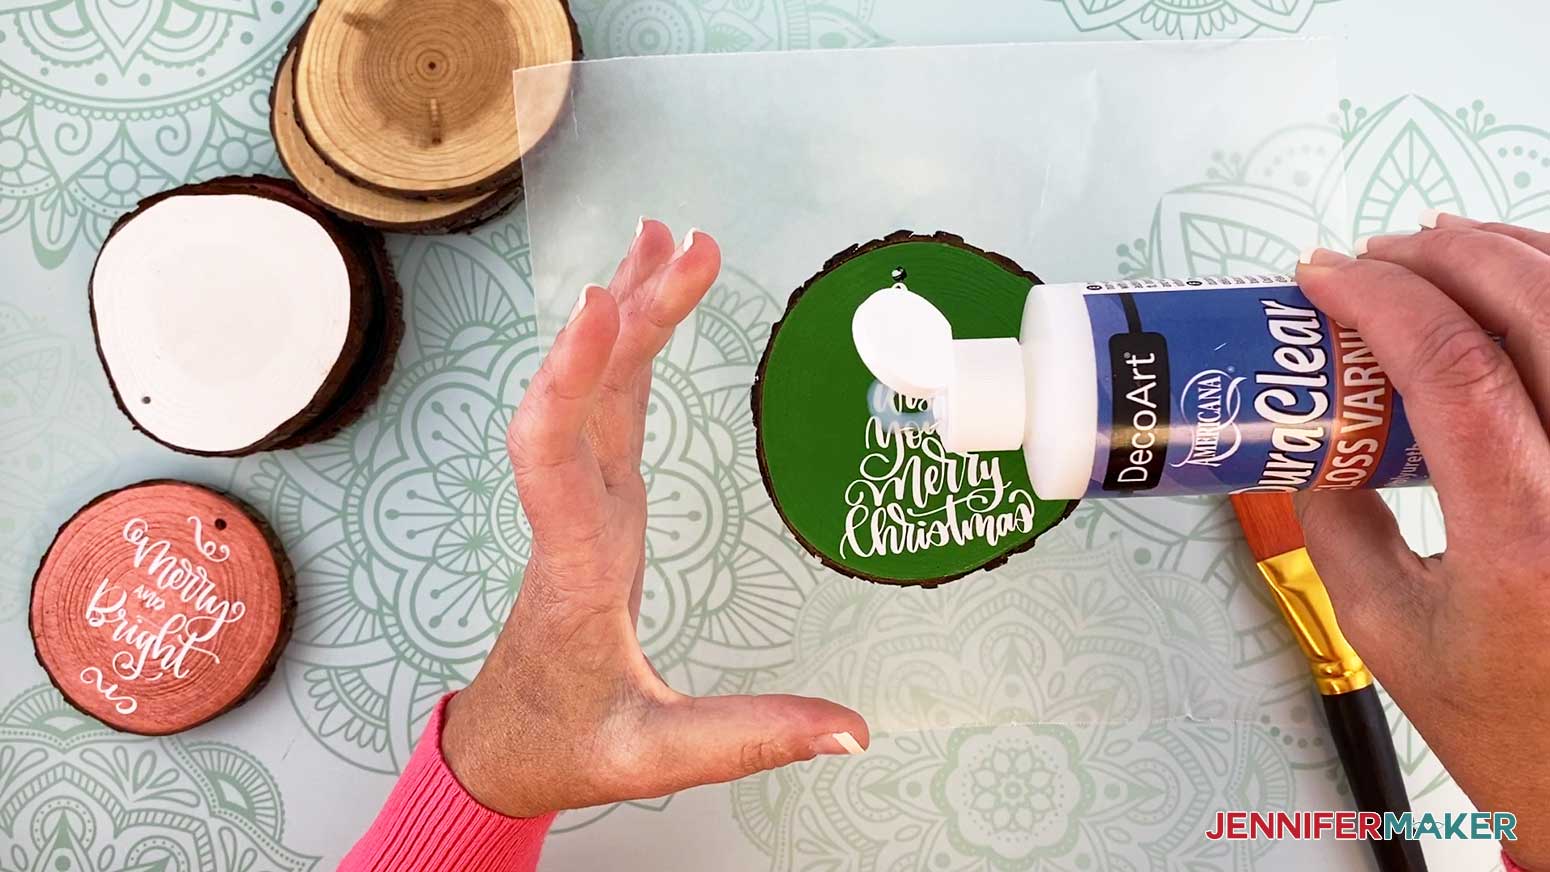 Pour a quarter-size dot of DuraClear Gloss Varnish on wood slice ornament